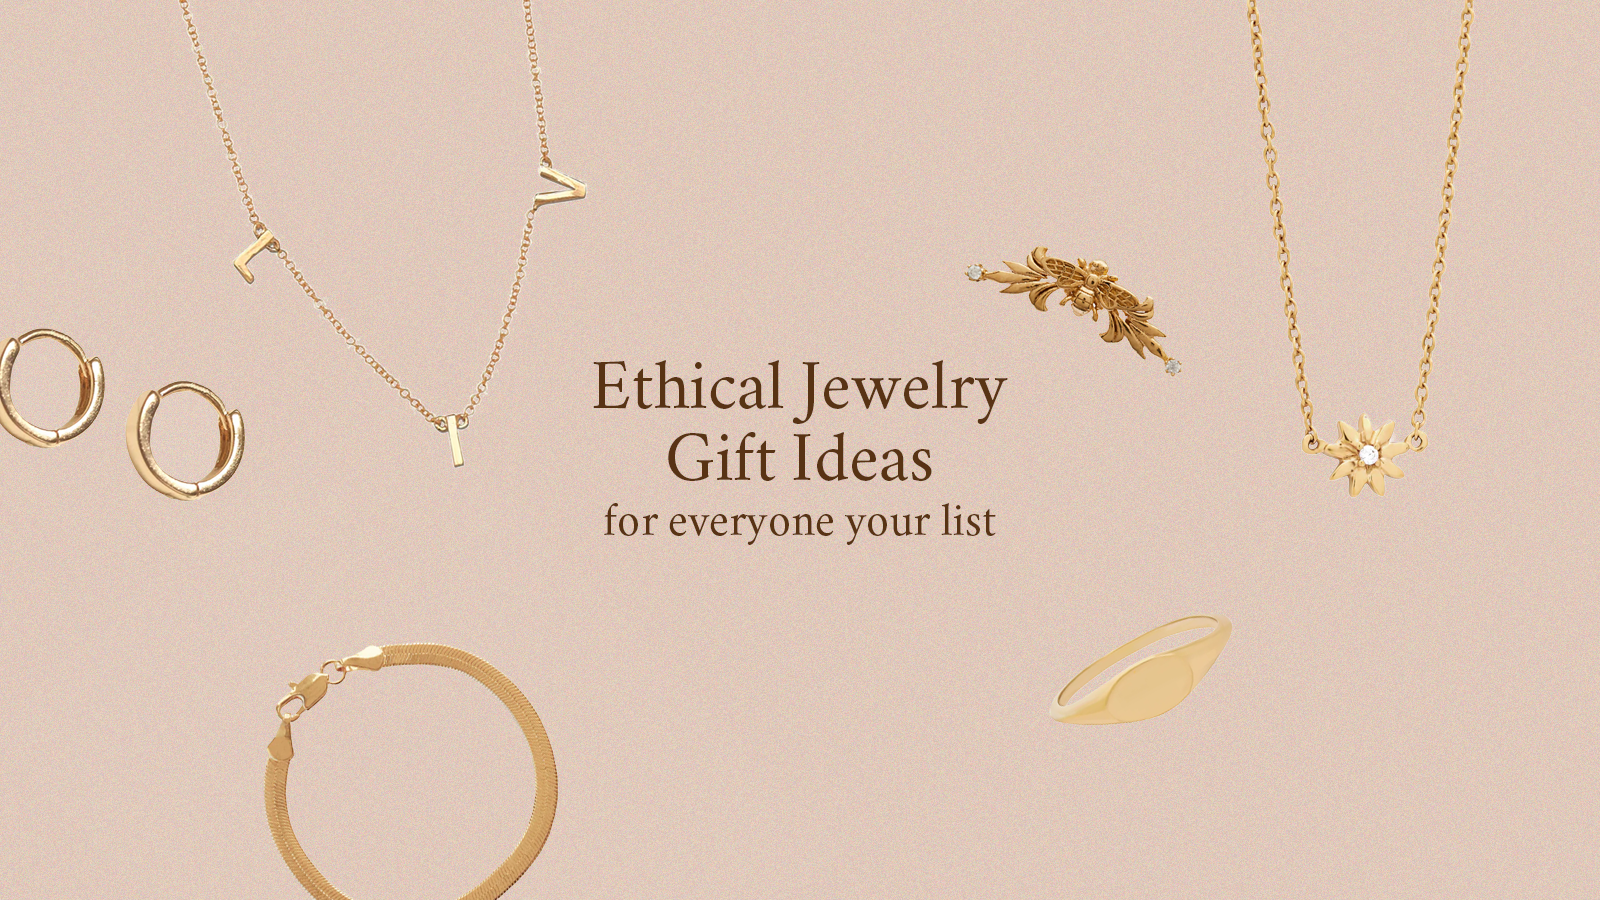 Ethical Jewelry Gifts Ideas for Everyone on your list